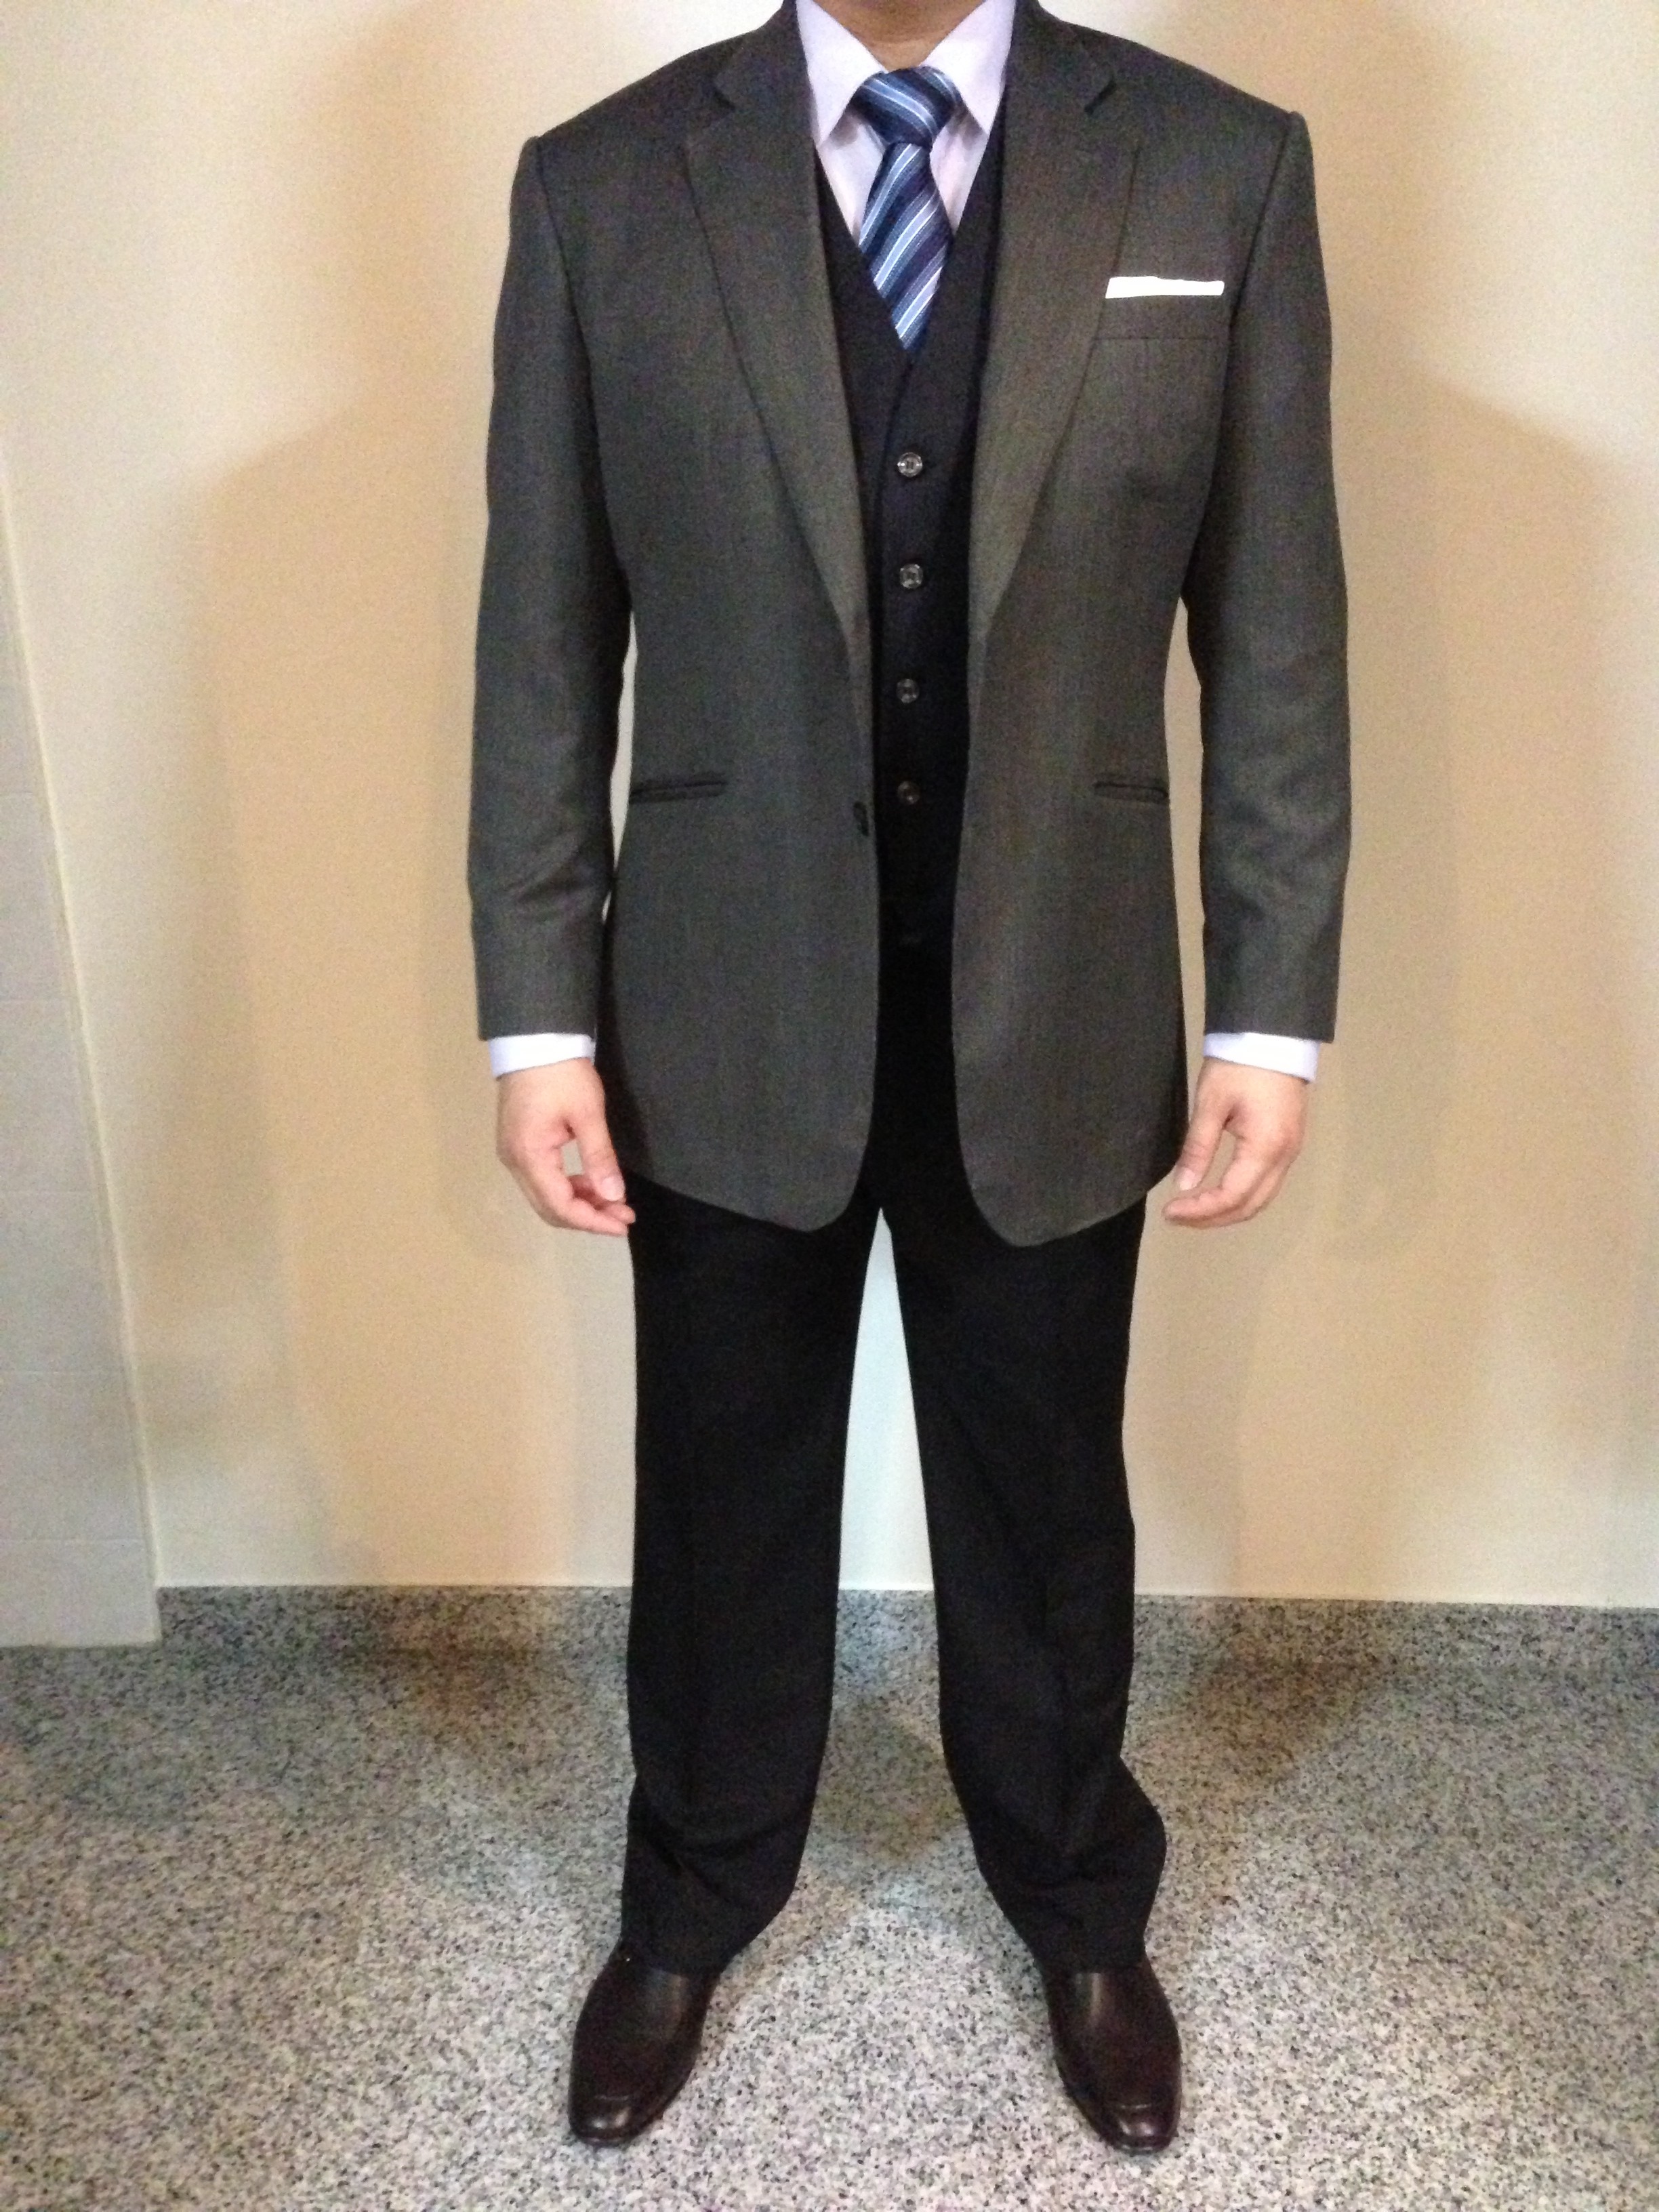 My First Tailored Suit. Appreciate all your comments